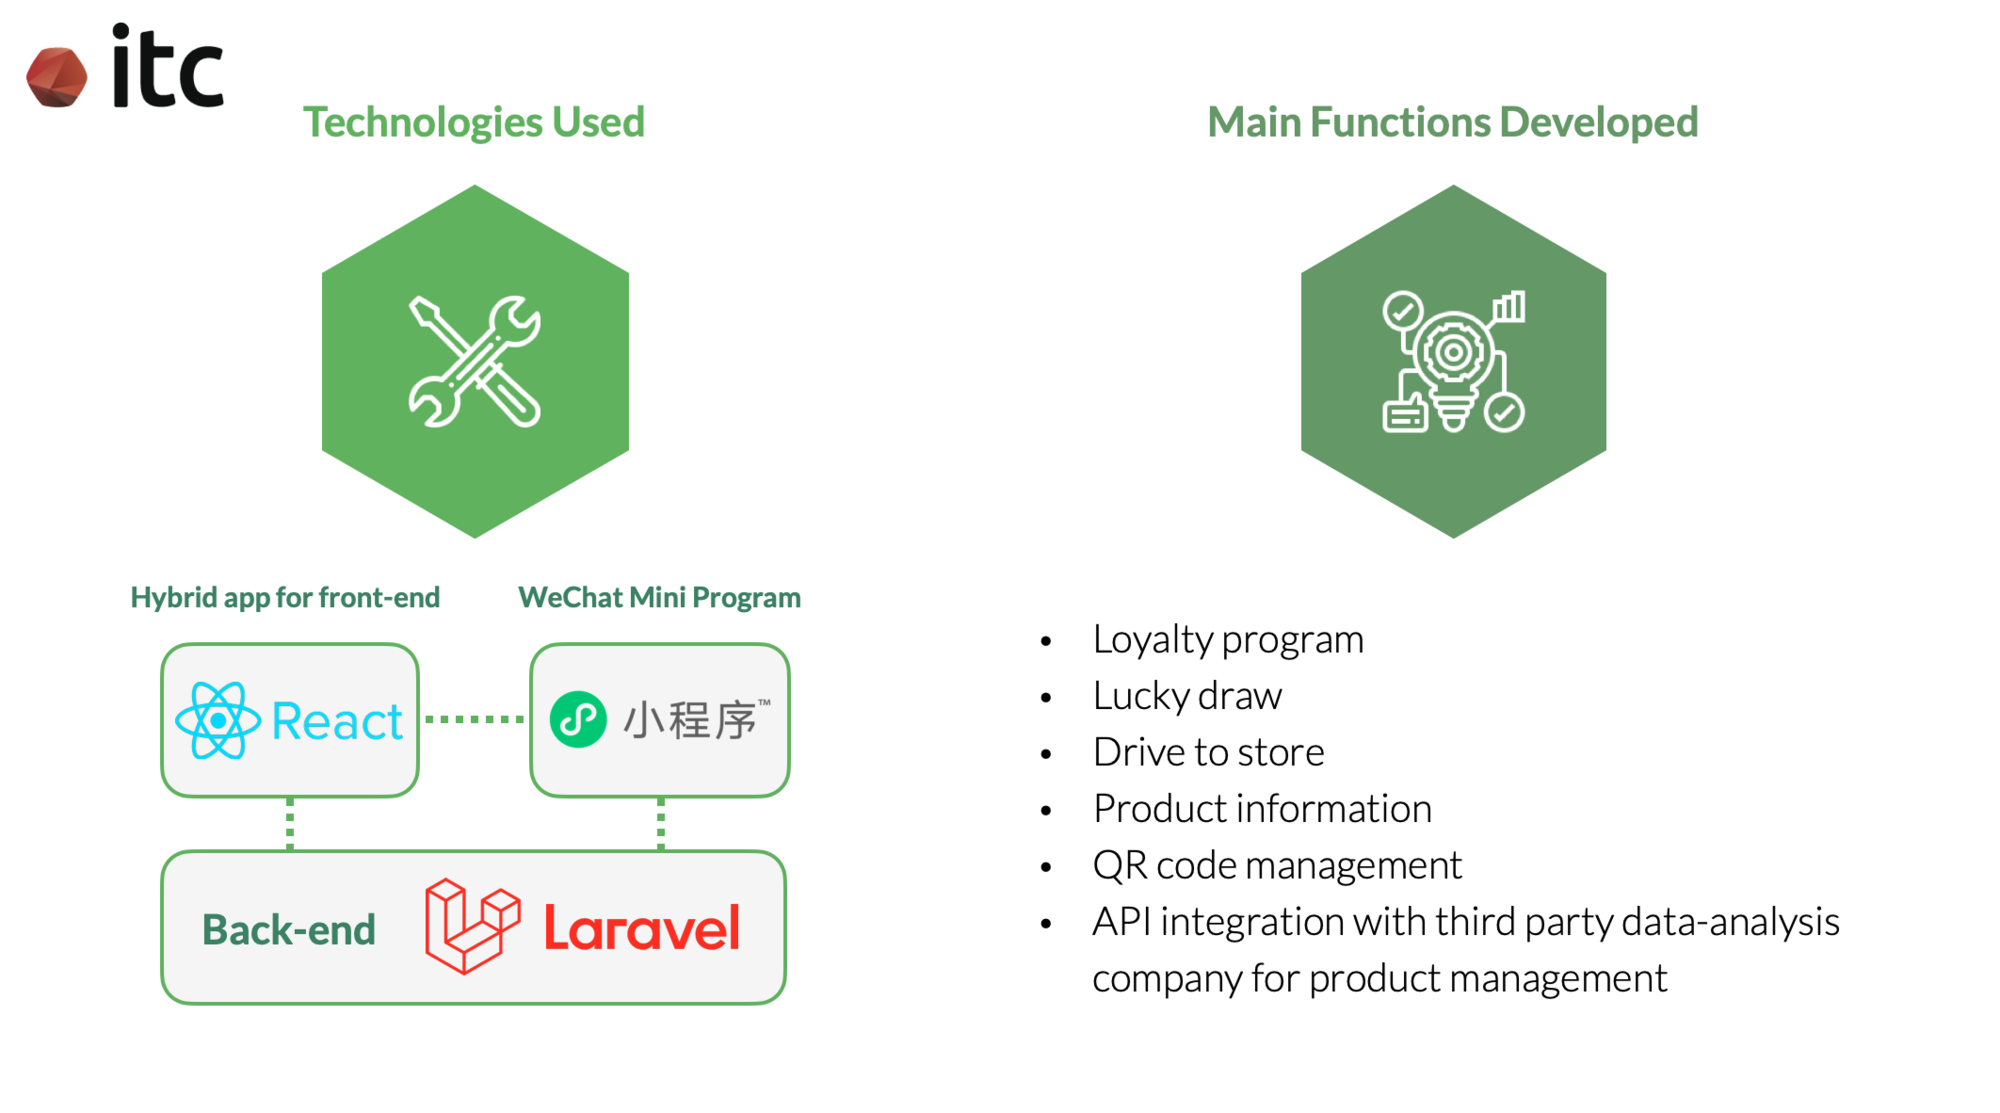 For the front-end, ITC used WeChat Mini Program Interface for China and ReactJS for other Asian countries, both of which were connected headless to the backend framework Laravel